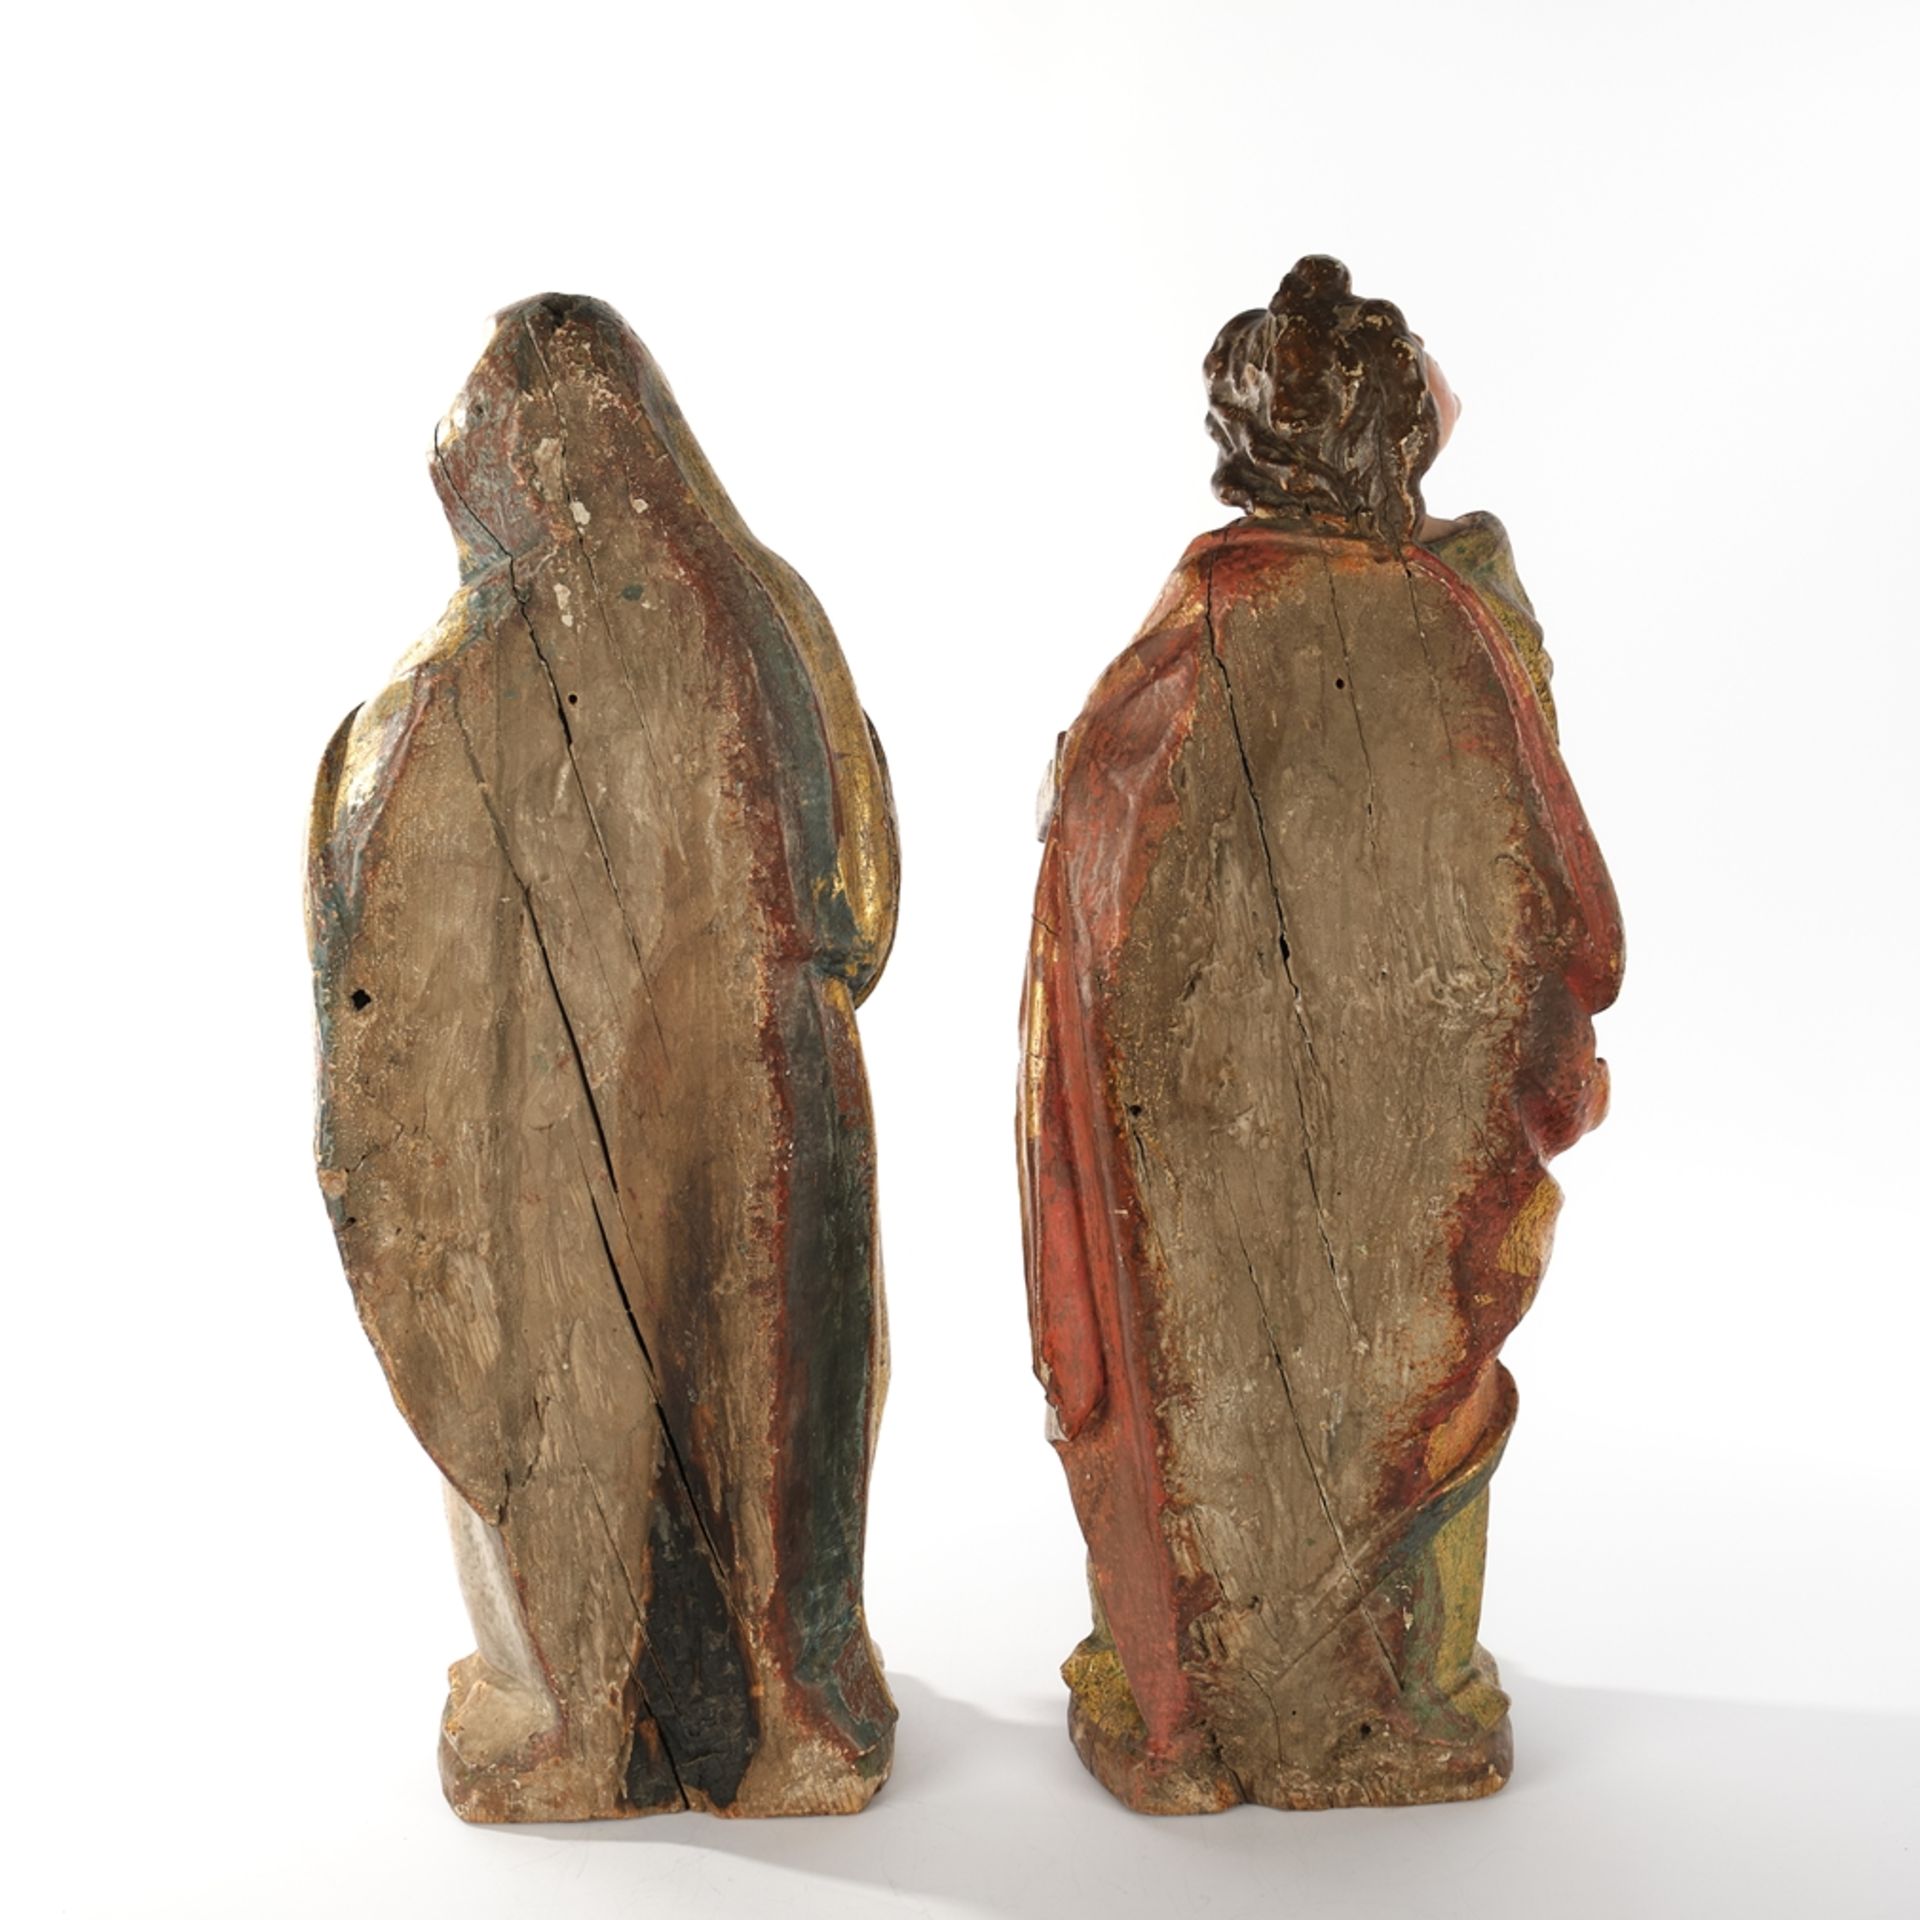 2 wooden figures(17th century),"Mary"and "John",(17th century), - Image 3 of 4